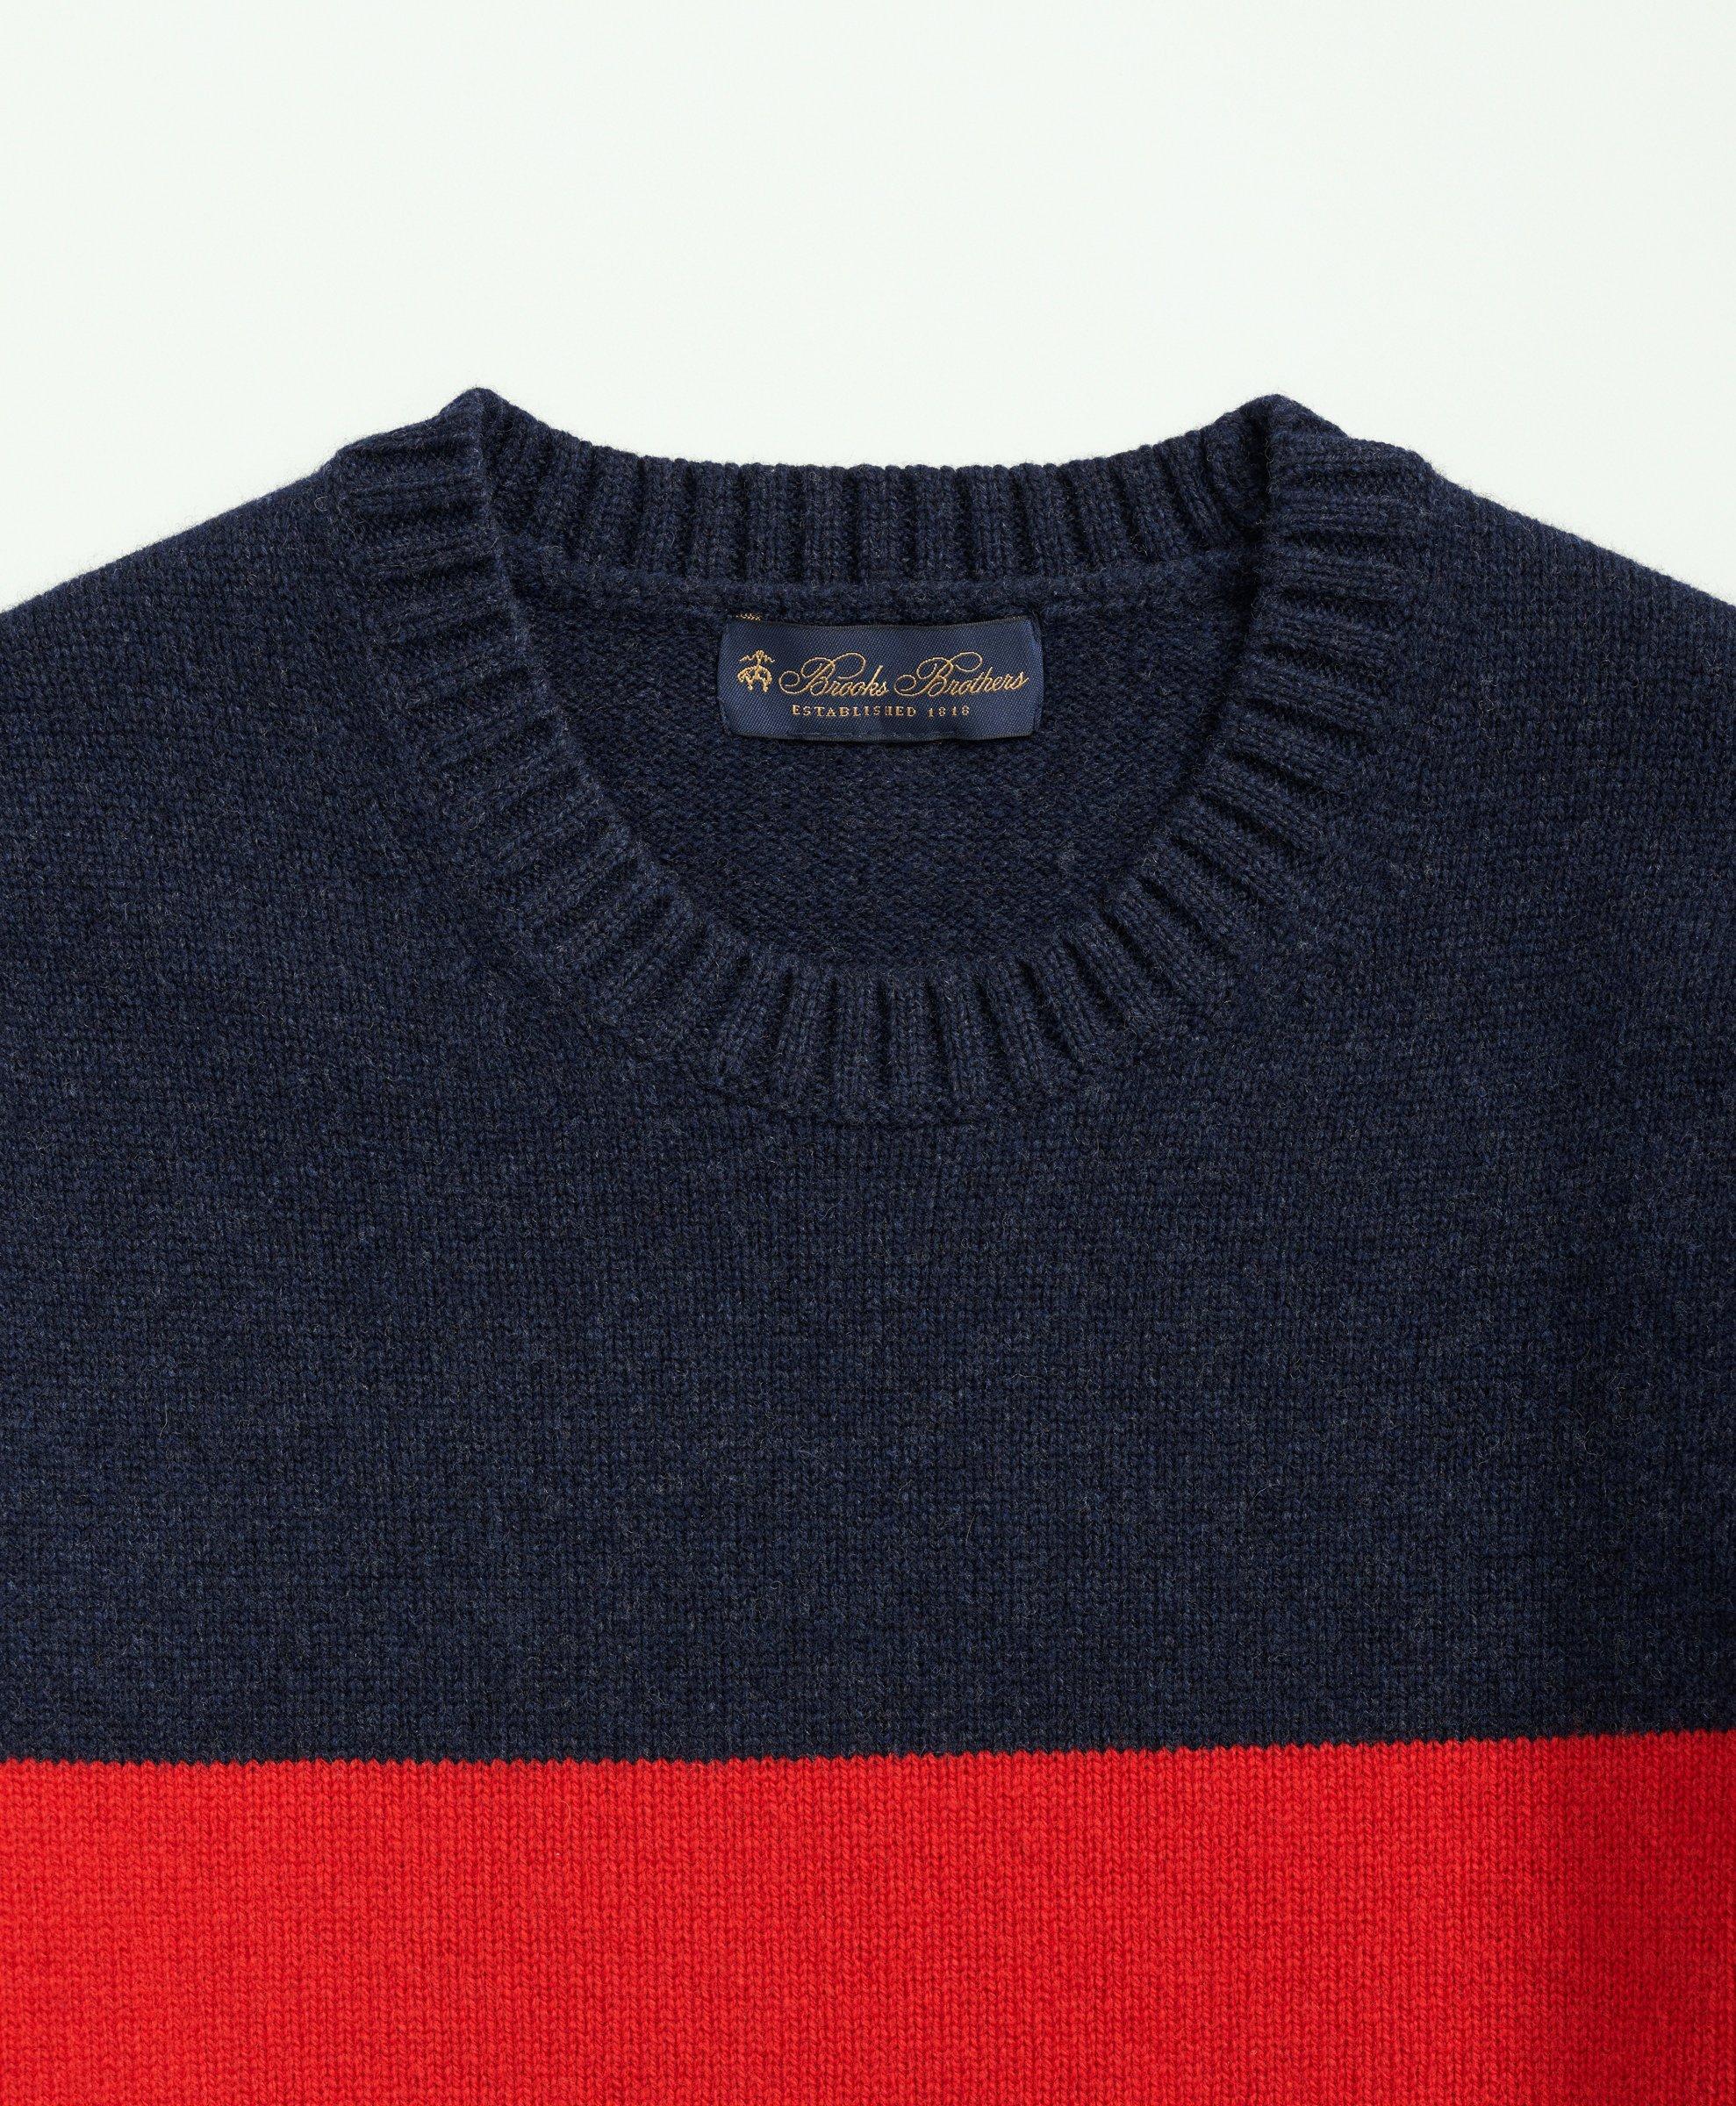 Lambswool Crewneck Chest Striped Sweater, image 2